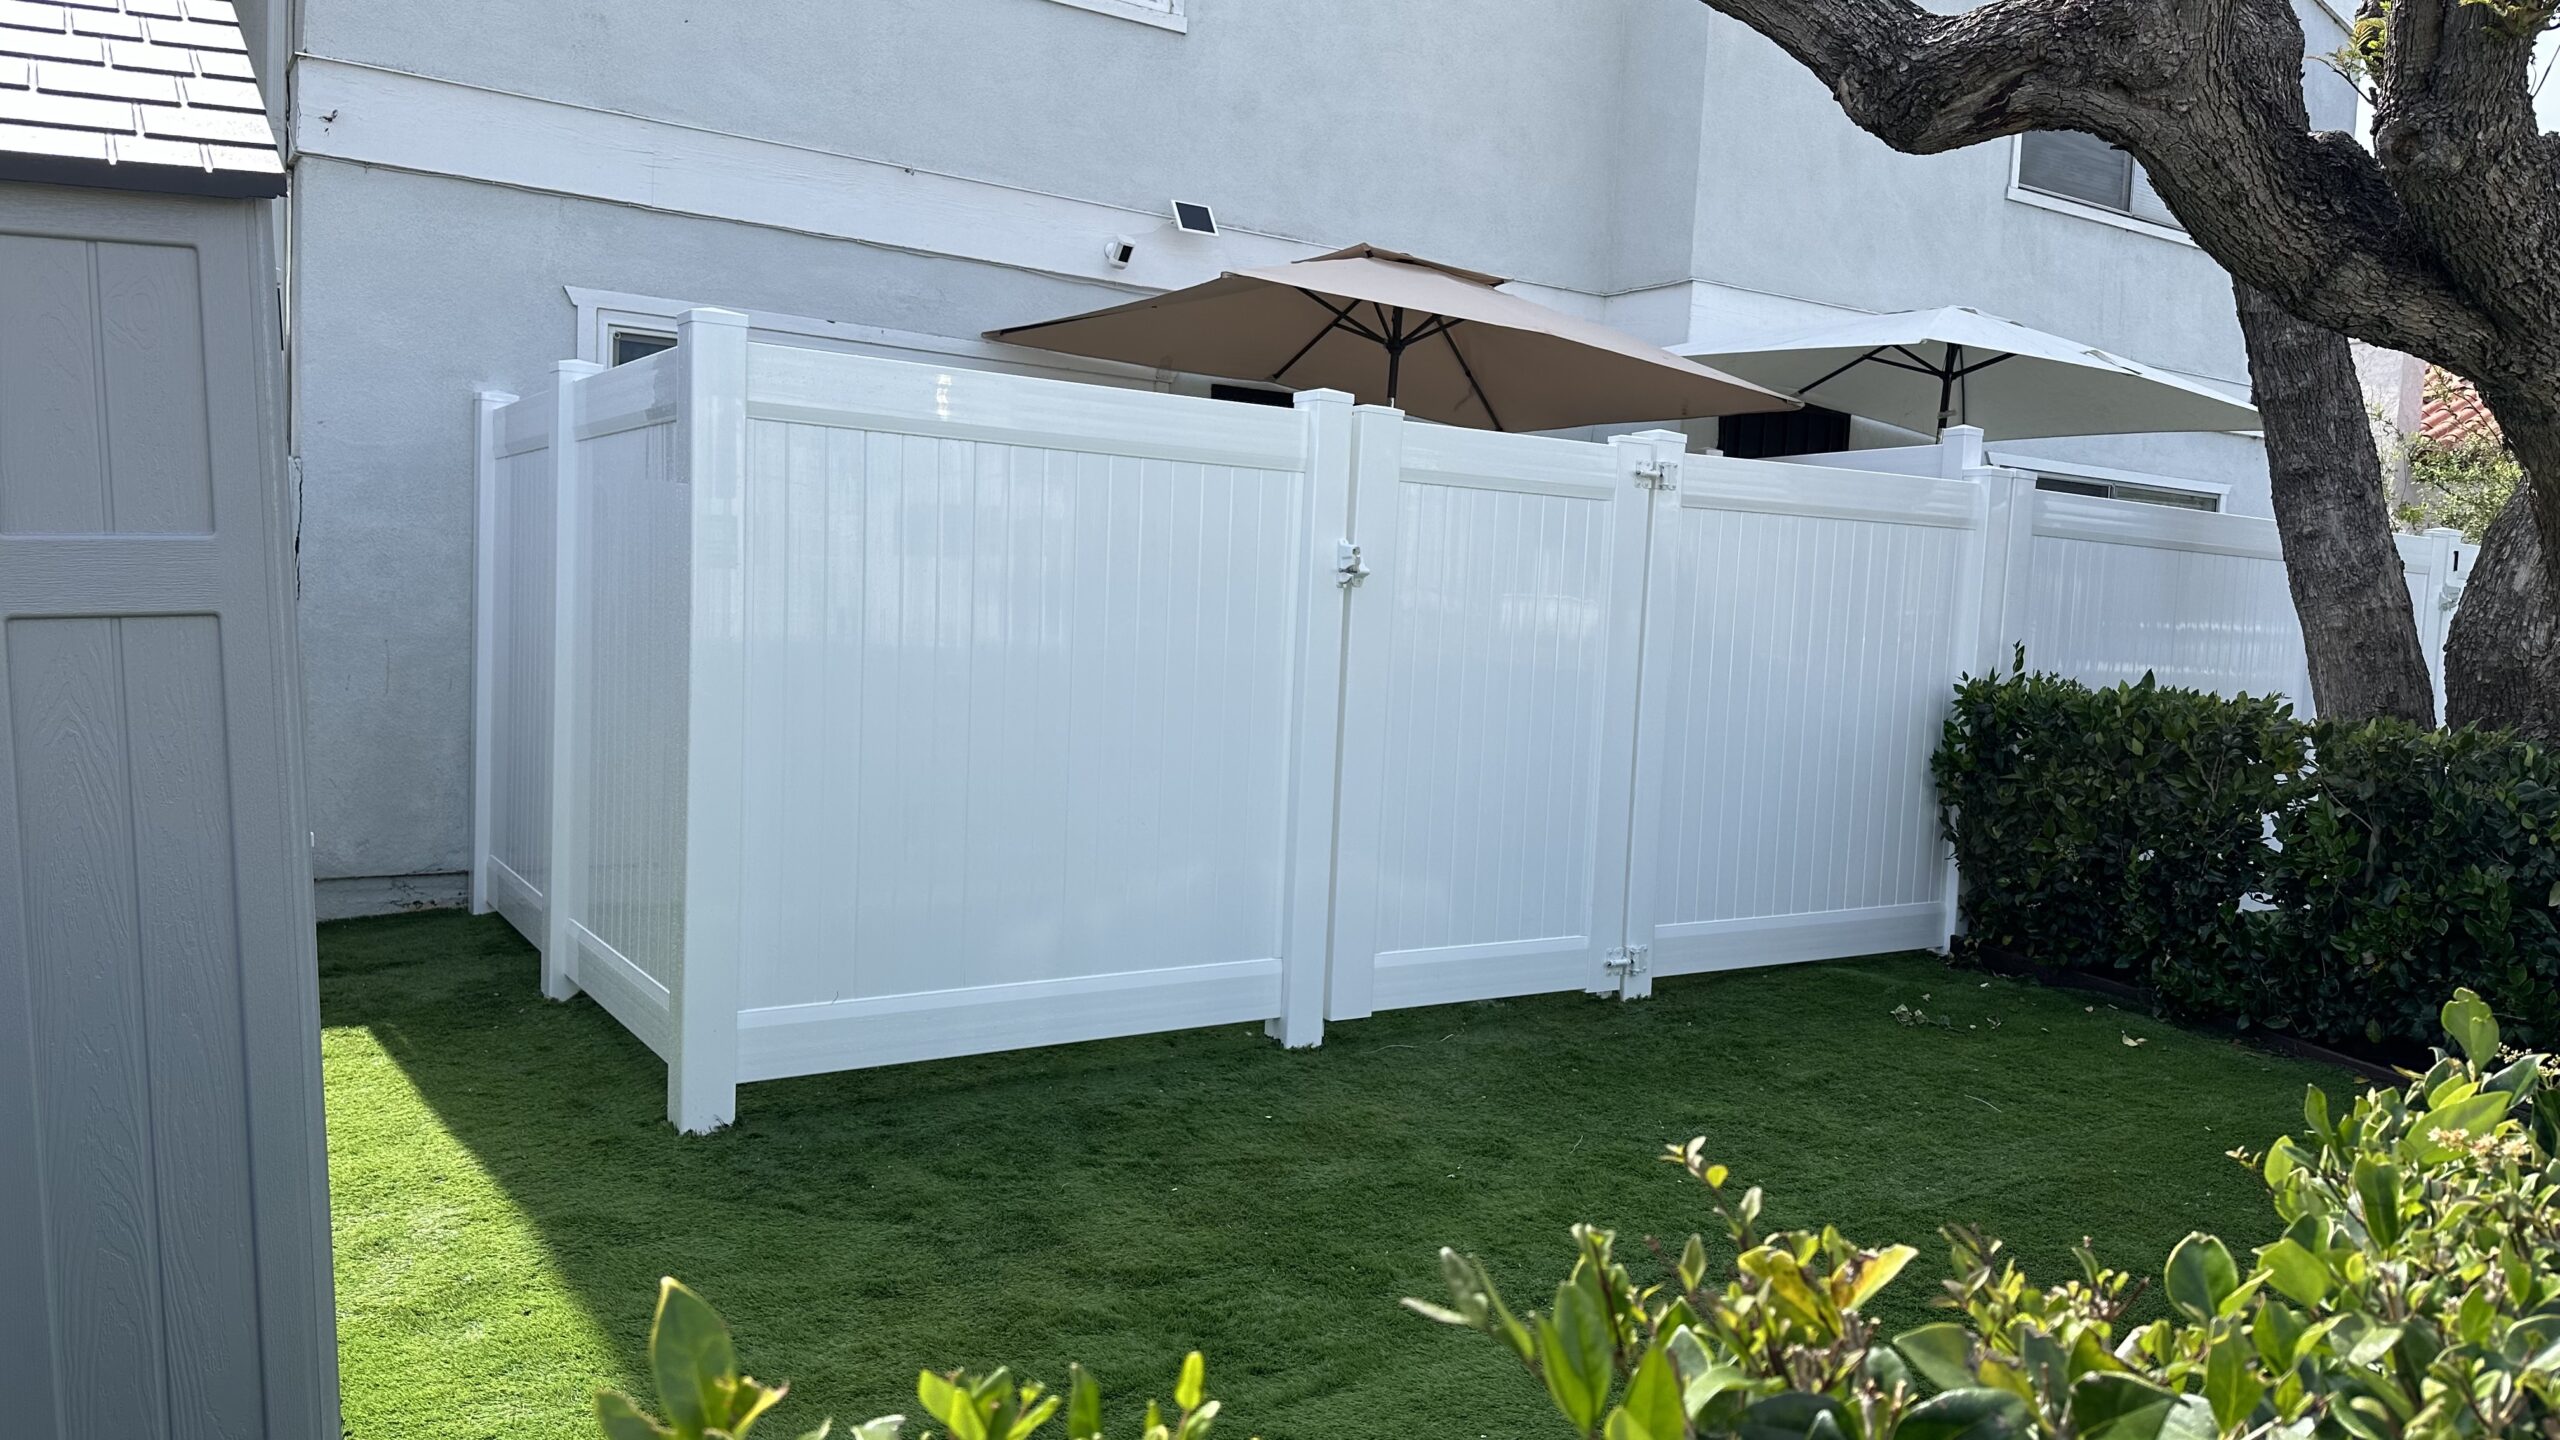 6' tall vinyl fence and gate